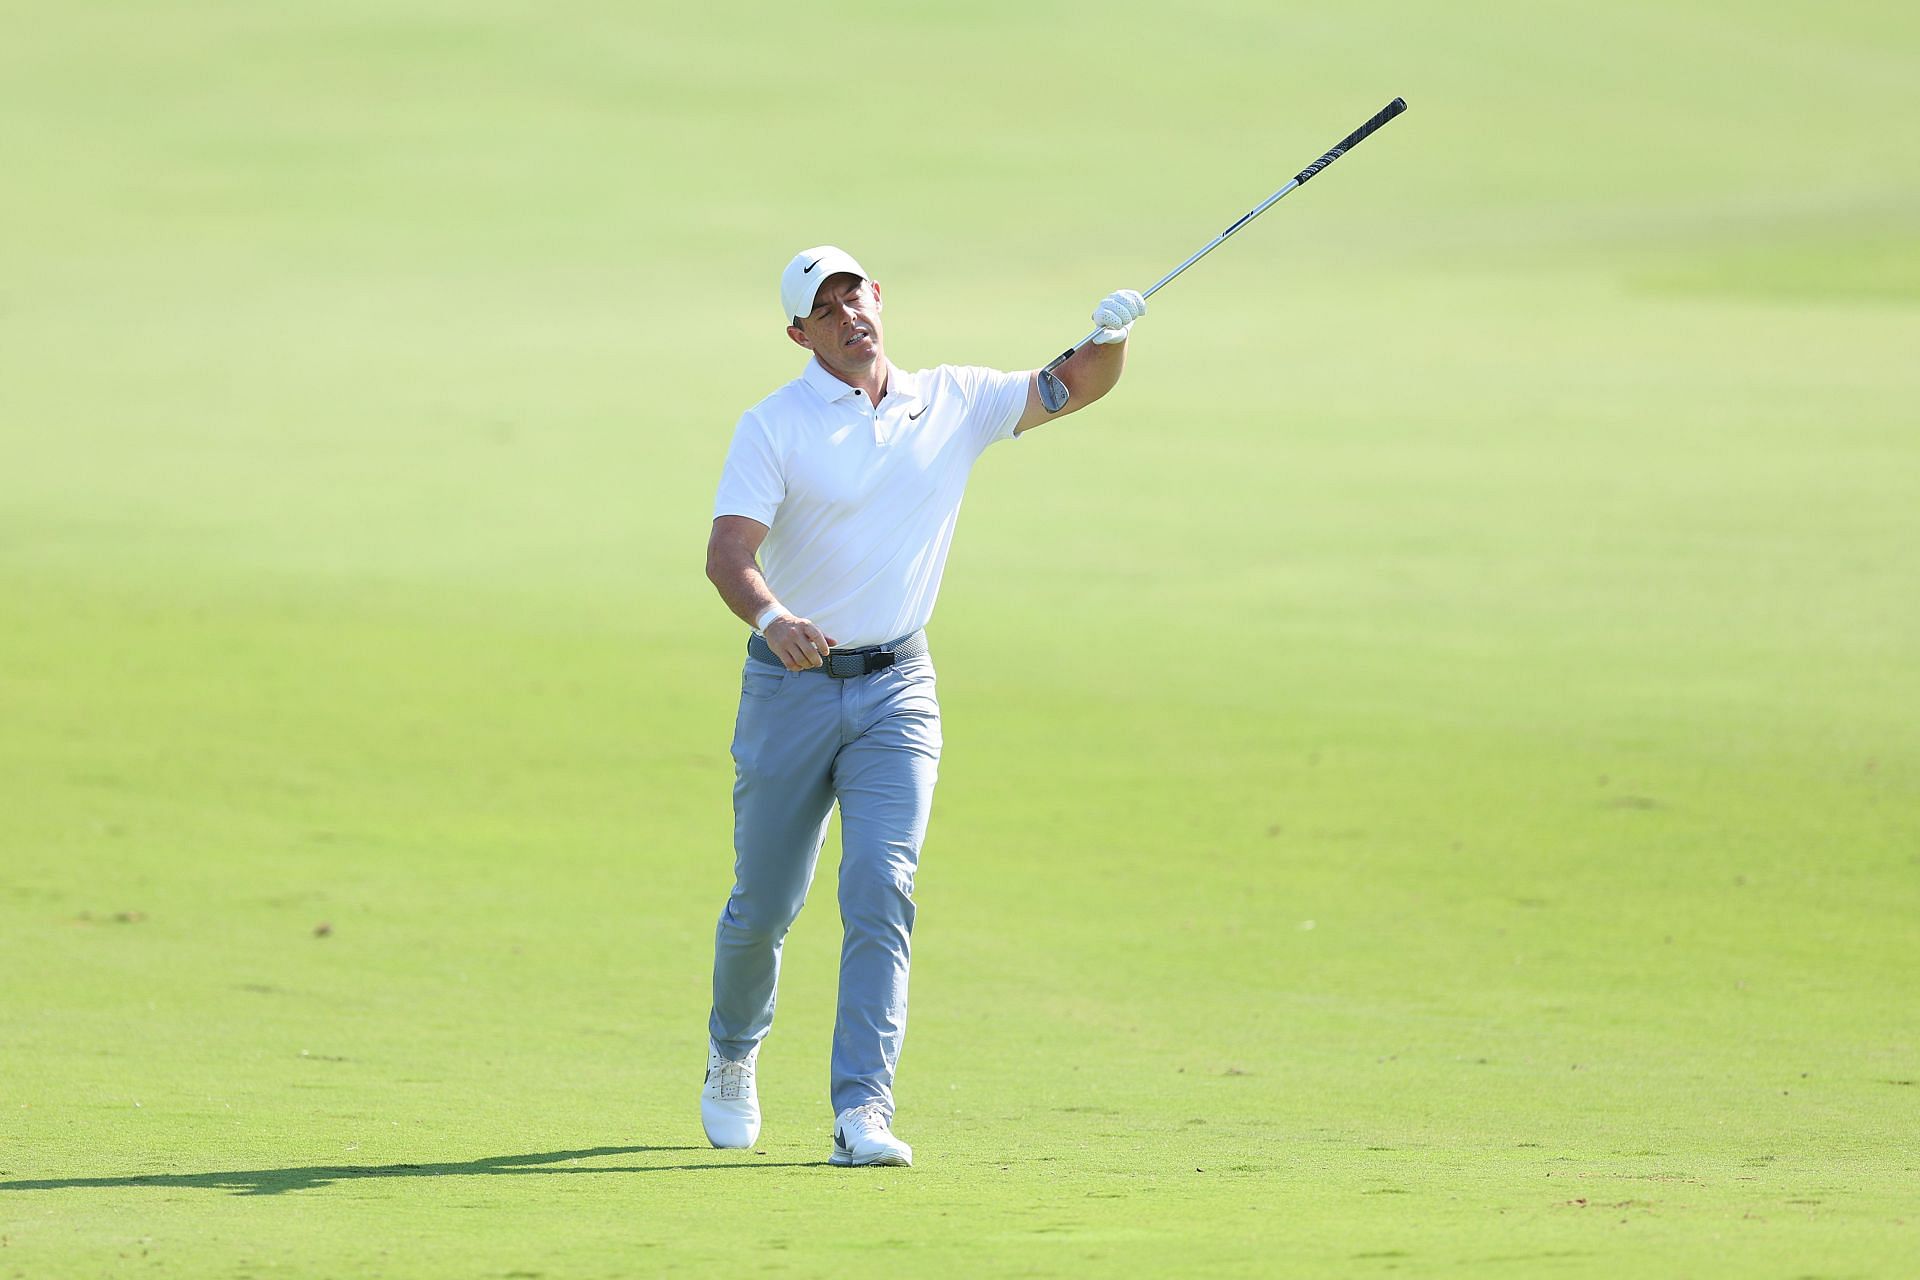 Rory McIlroy could dethrone Scottie Scheffler at the top